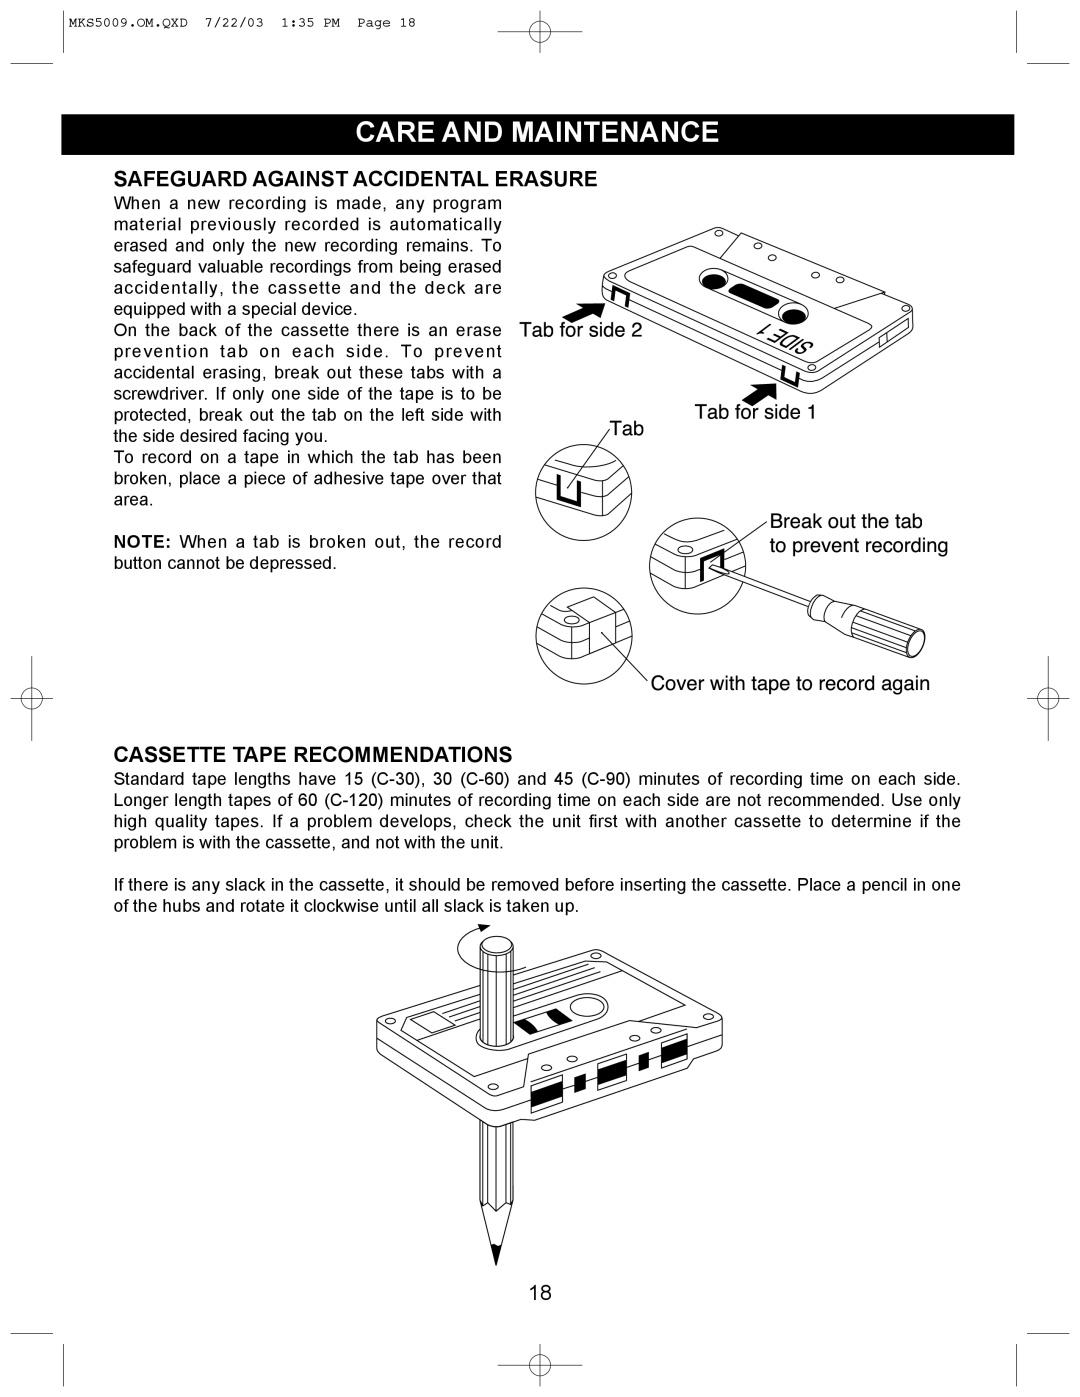 Memorex MB2186A manual Care And Maintenance, Cassette Tape Recommendations 